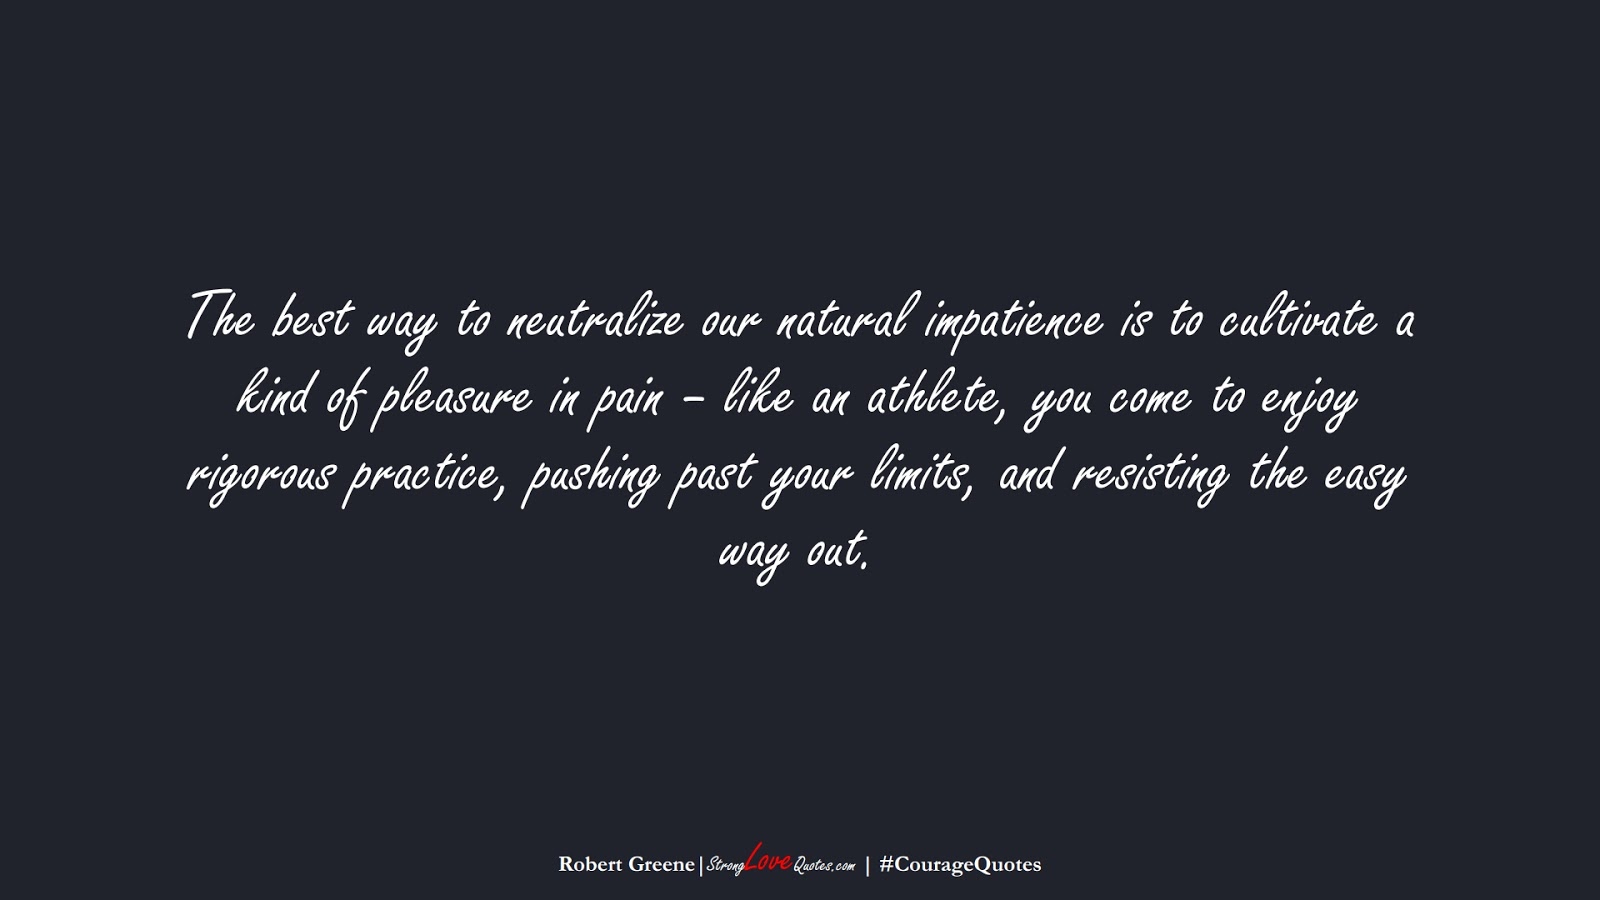 The best way to neutralize our natural impatience is to cultivate a kind of pleasure in pain – like an athlete, you come to enjoy rigorous practice, pushing past your limits, and resisting the easy way out. (Robert Greene);  #CourageQuotes